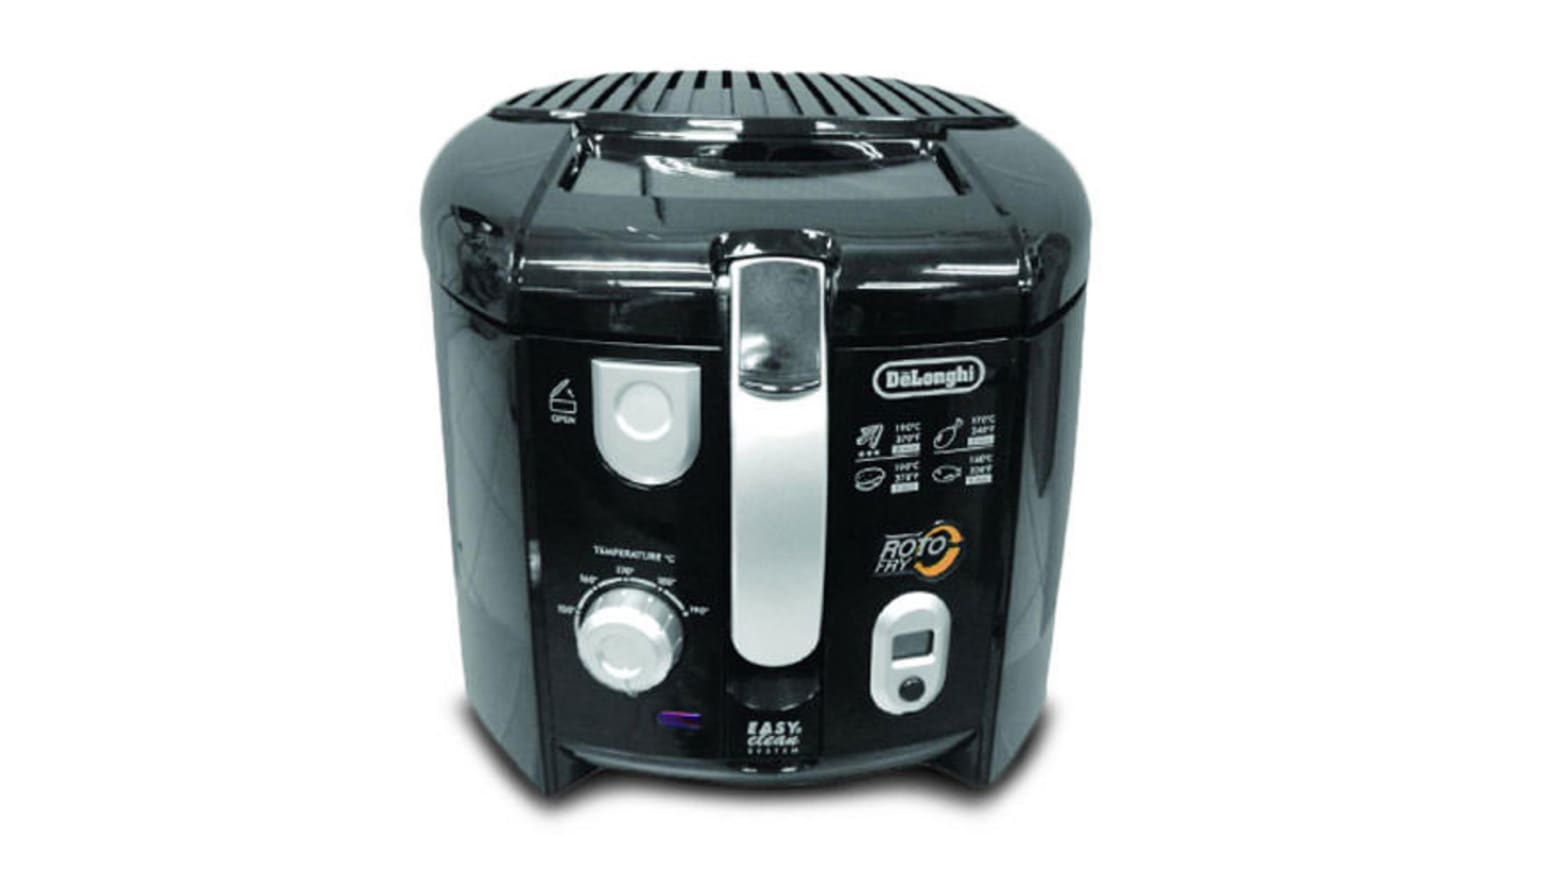 Delonghi Cool Touch RotoFry Low Oil Deep Fryer in Black